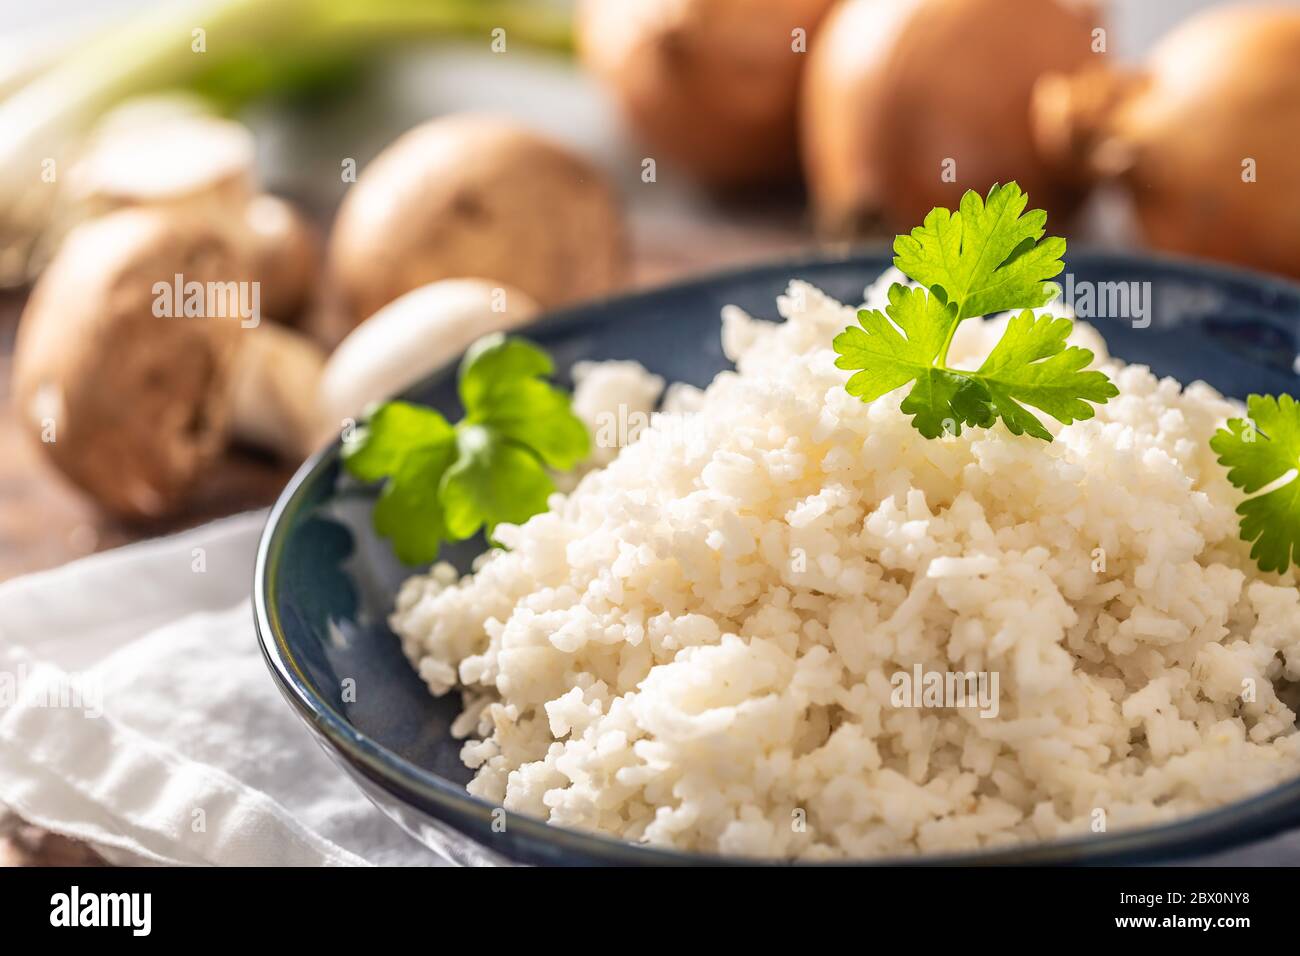 Bowl of steamed rice and parsley tops with mushrooms and leaks in the background Stock Photo